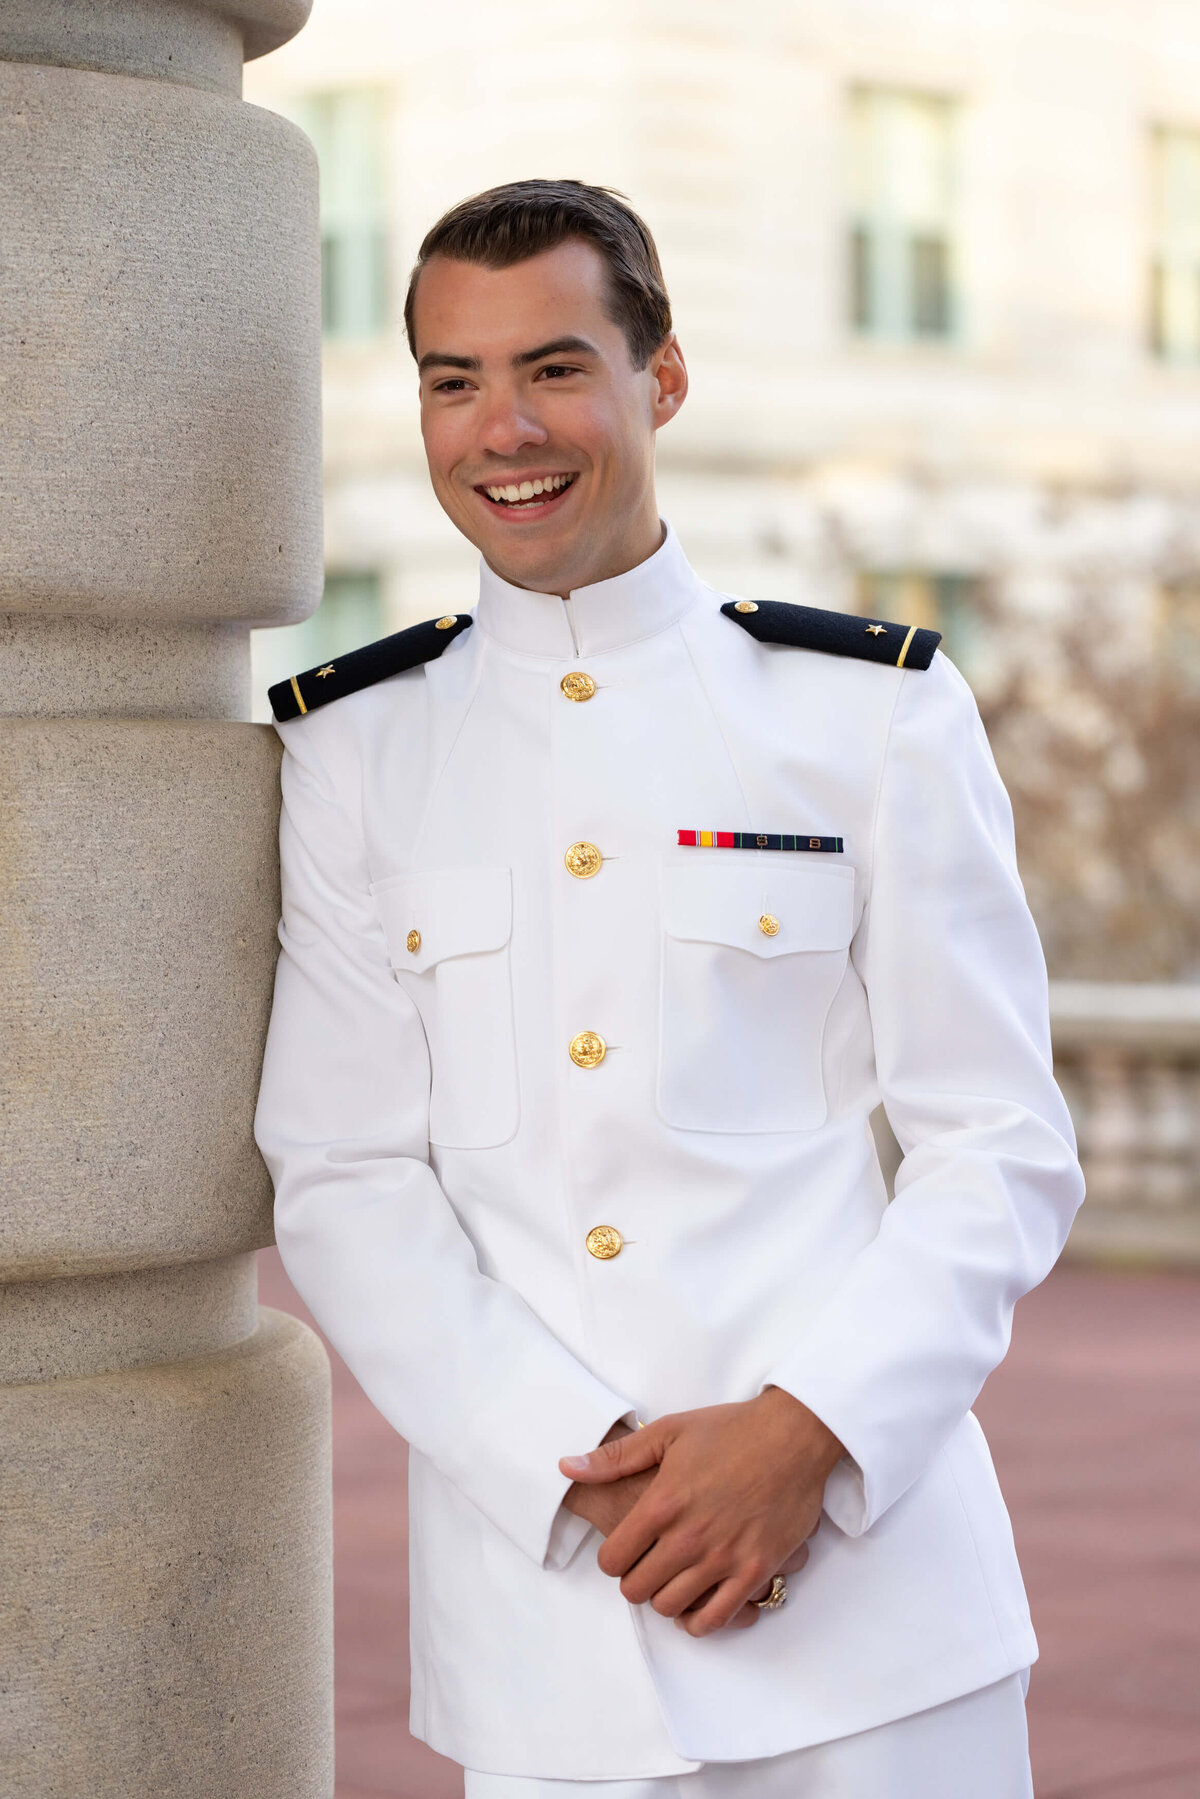 Naval Academy graduate laughing for senior photos in Annapolis, Maryland.